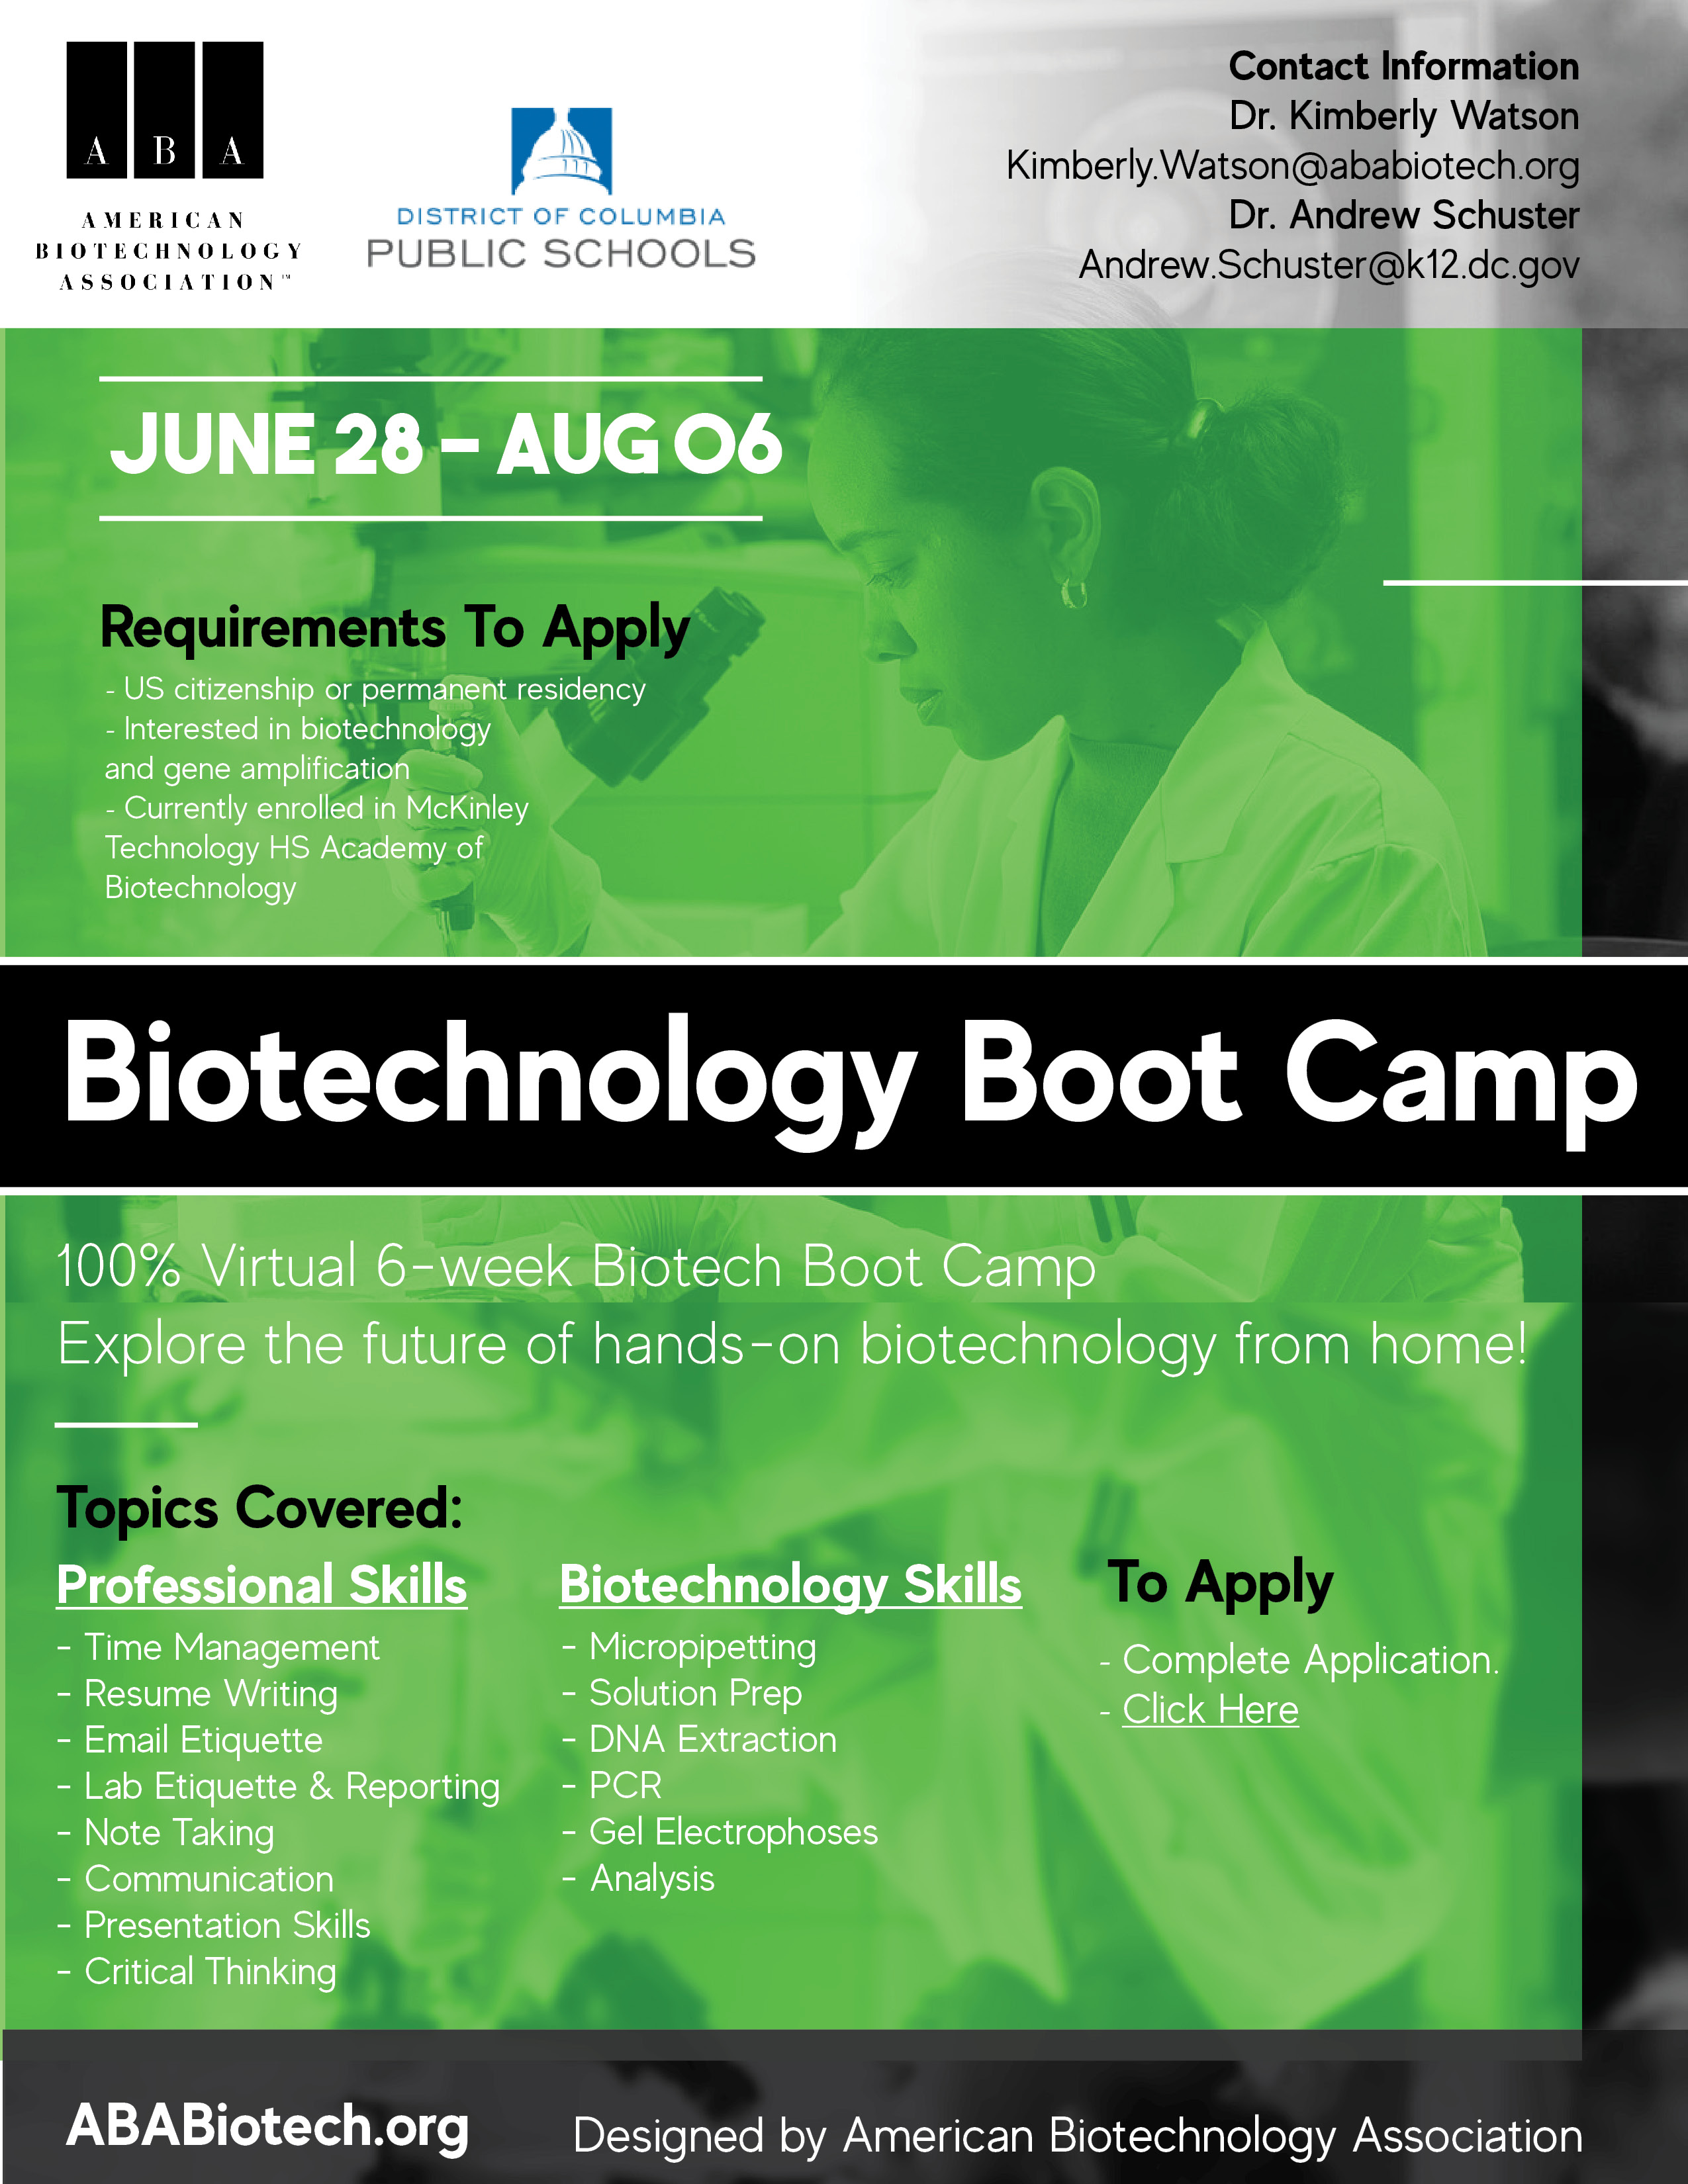 Biotech bootcamp flyer for promotion